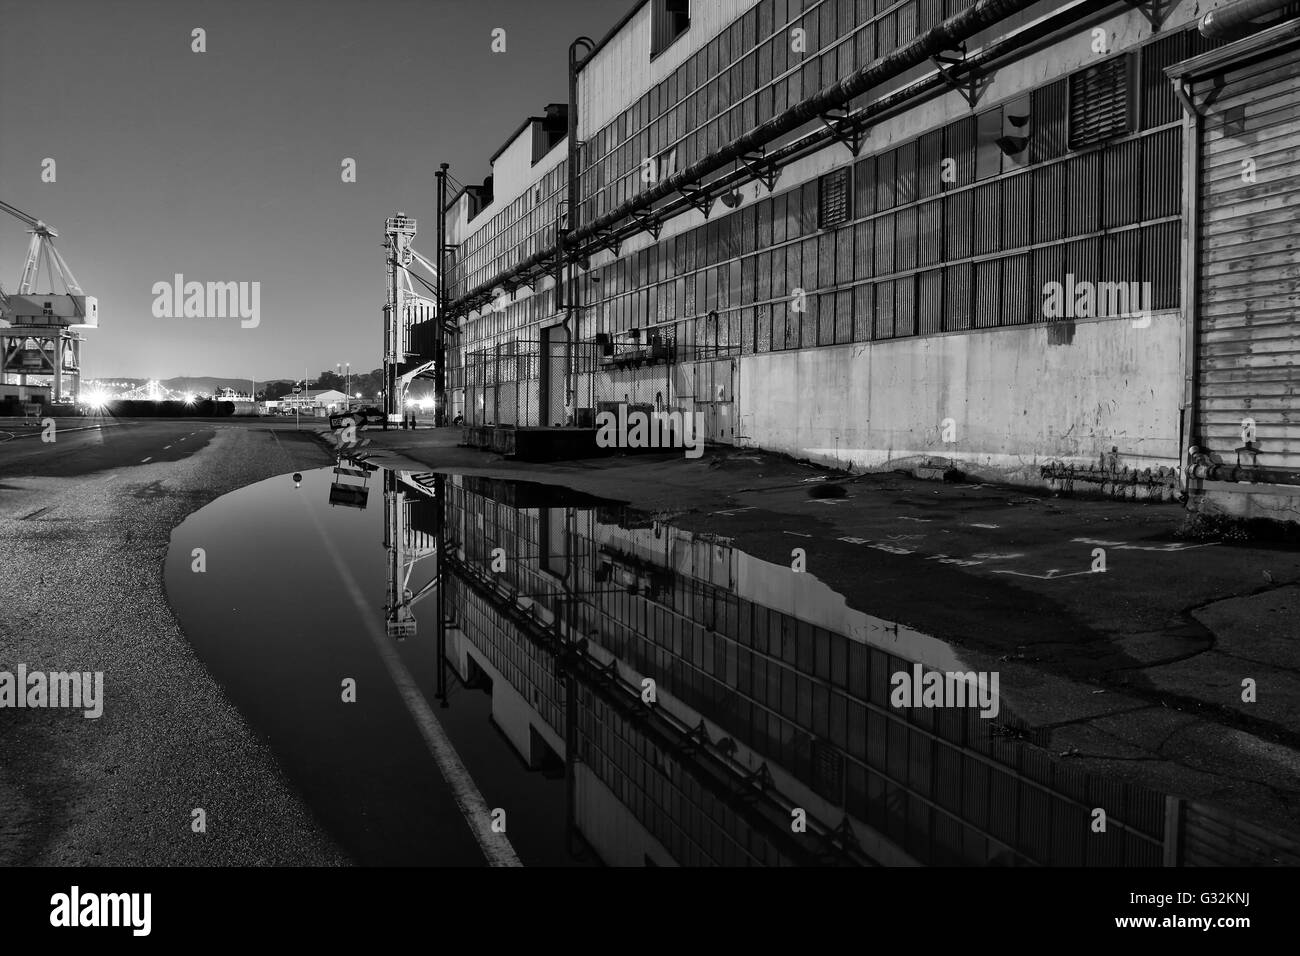 Night image taken at Mare Island, located in Vallejo, California. Puddle provided a fantastic reflection of the adjacent buildin Stock Photo